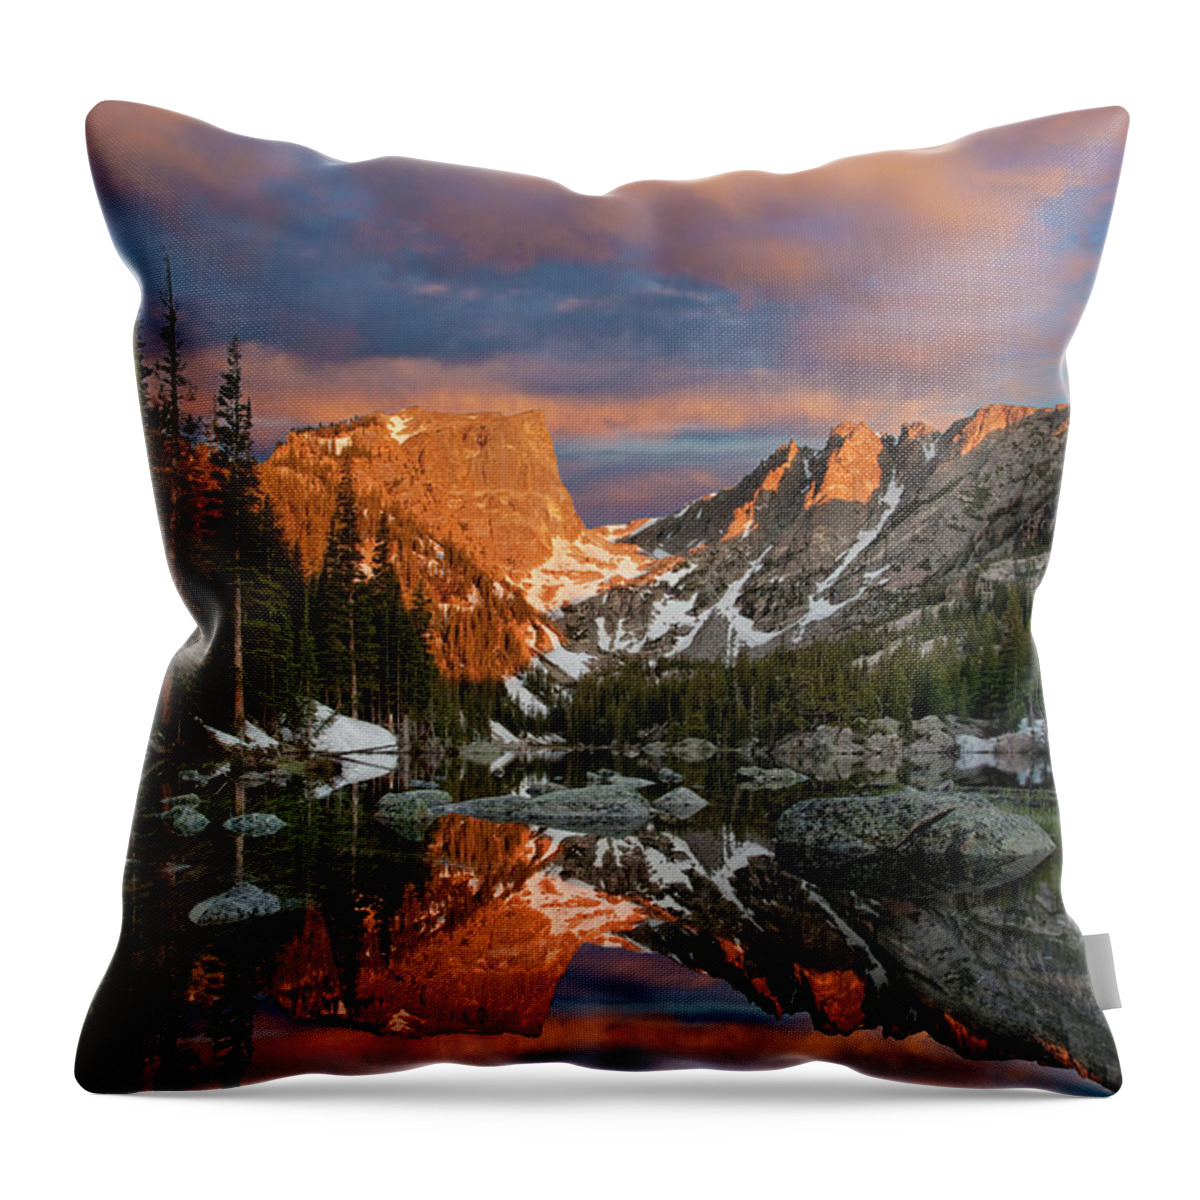 Tranquility Throw Pillow featuring the photograph Dream Lake by Brad Mcginley Photography